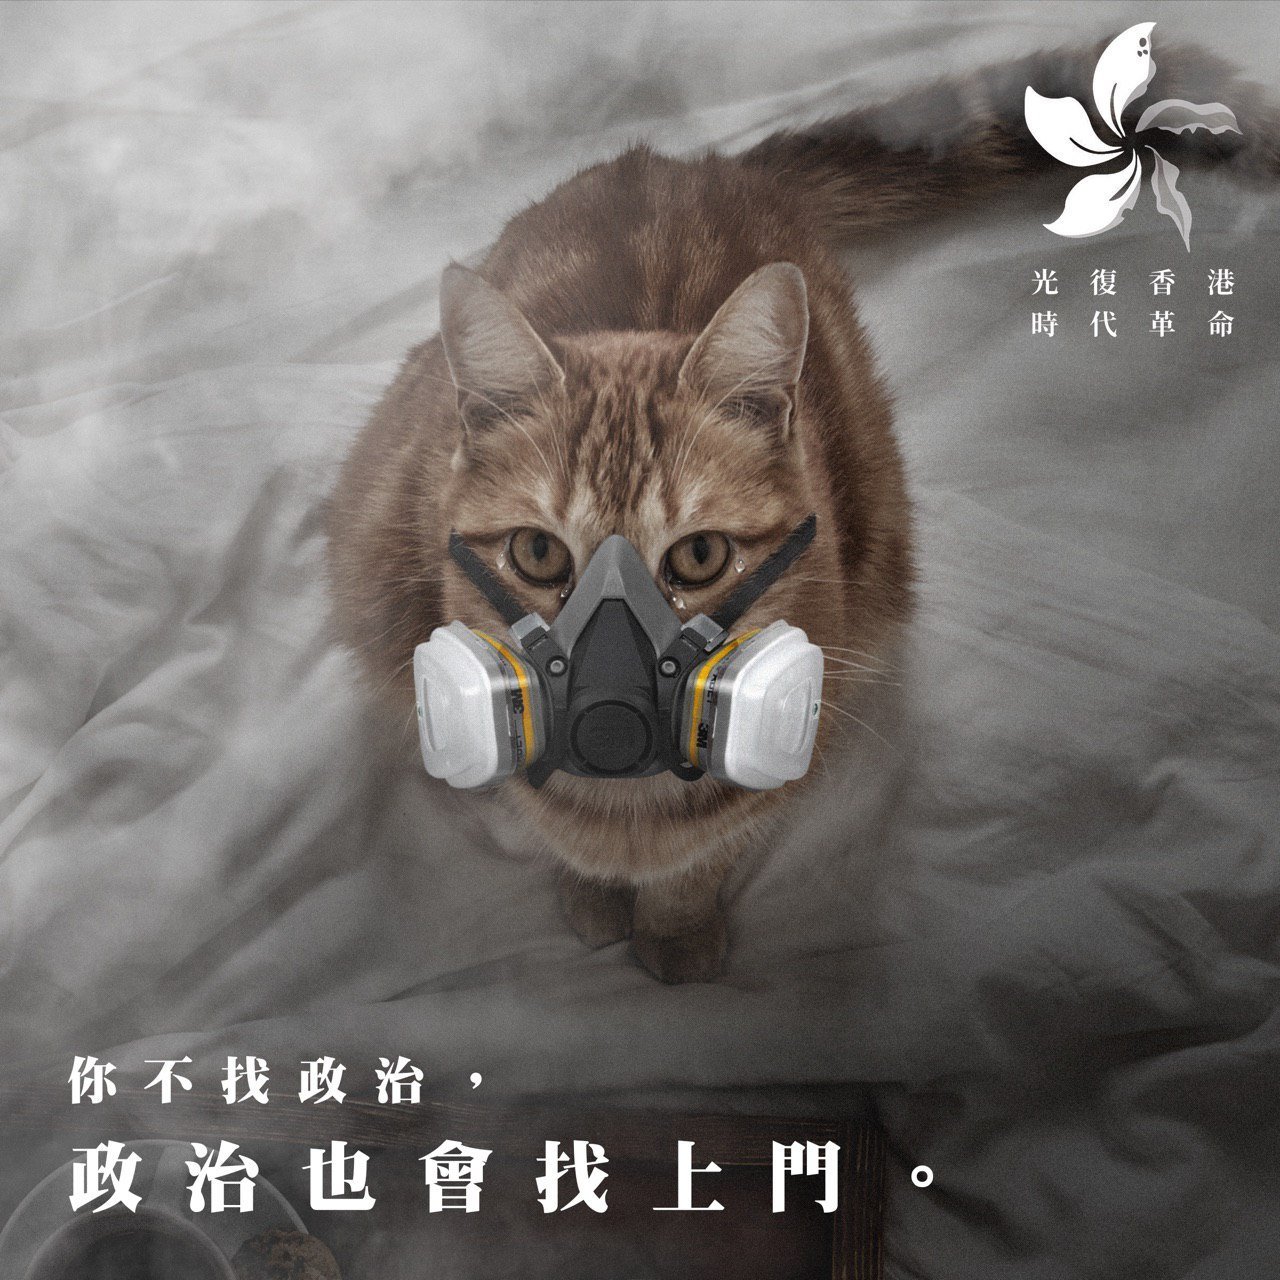 A photoshopped picture of a tabby cat wearing a respirator and tearing up, sitting on a rumpled grey sheet. A withered bauhinia logo is in the top right, with the protest slogan "Liberate Hong Kong, Revolution of our Times" underneath. A caption in Chinese underneath the image of the cat reads: "(Even if) you don't seek out politics, politics will seek out you."